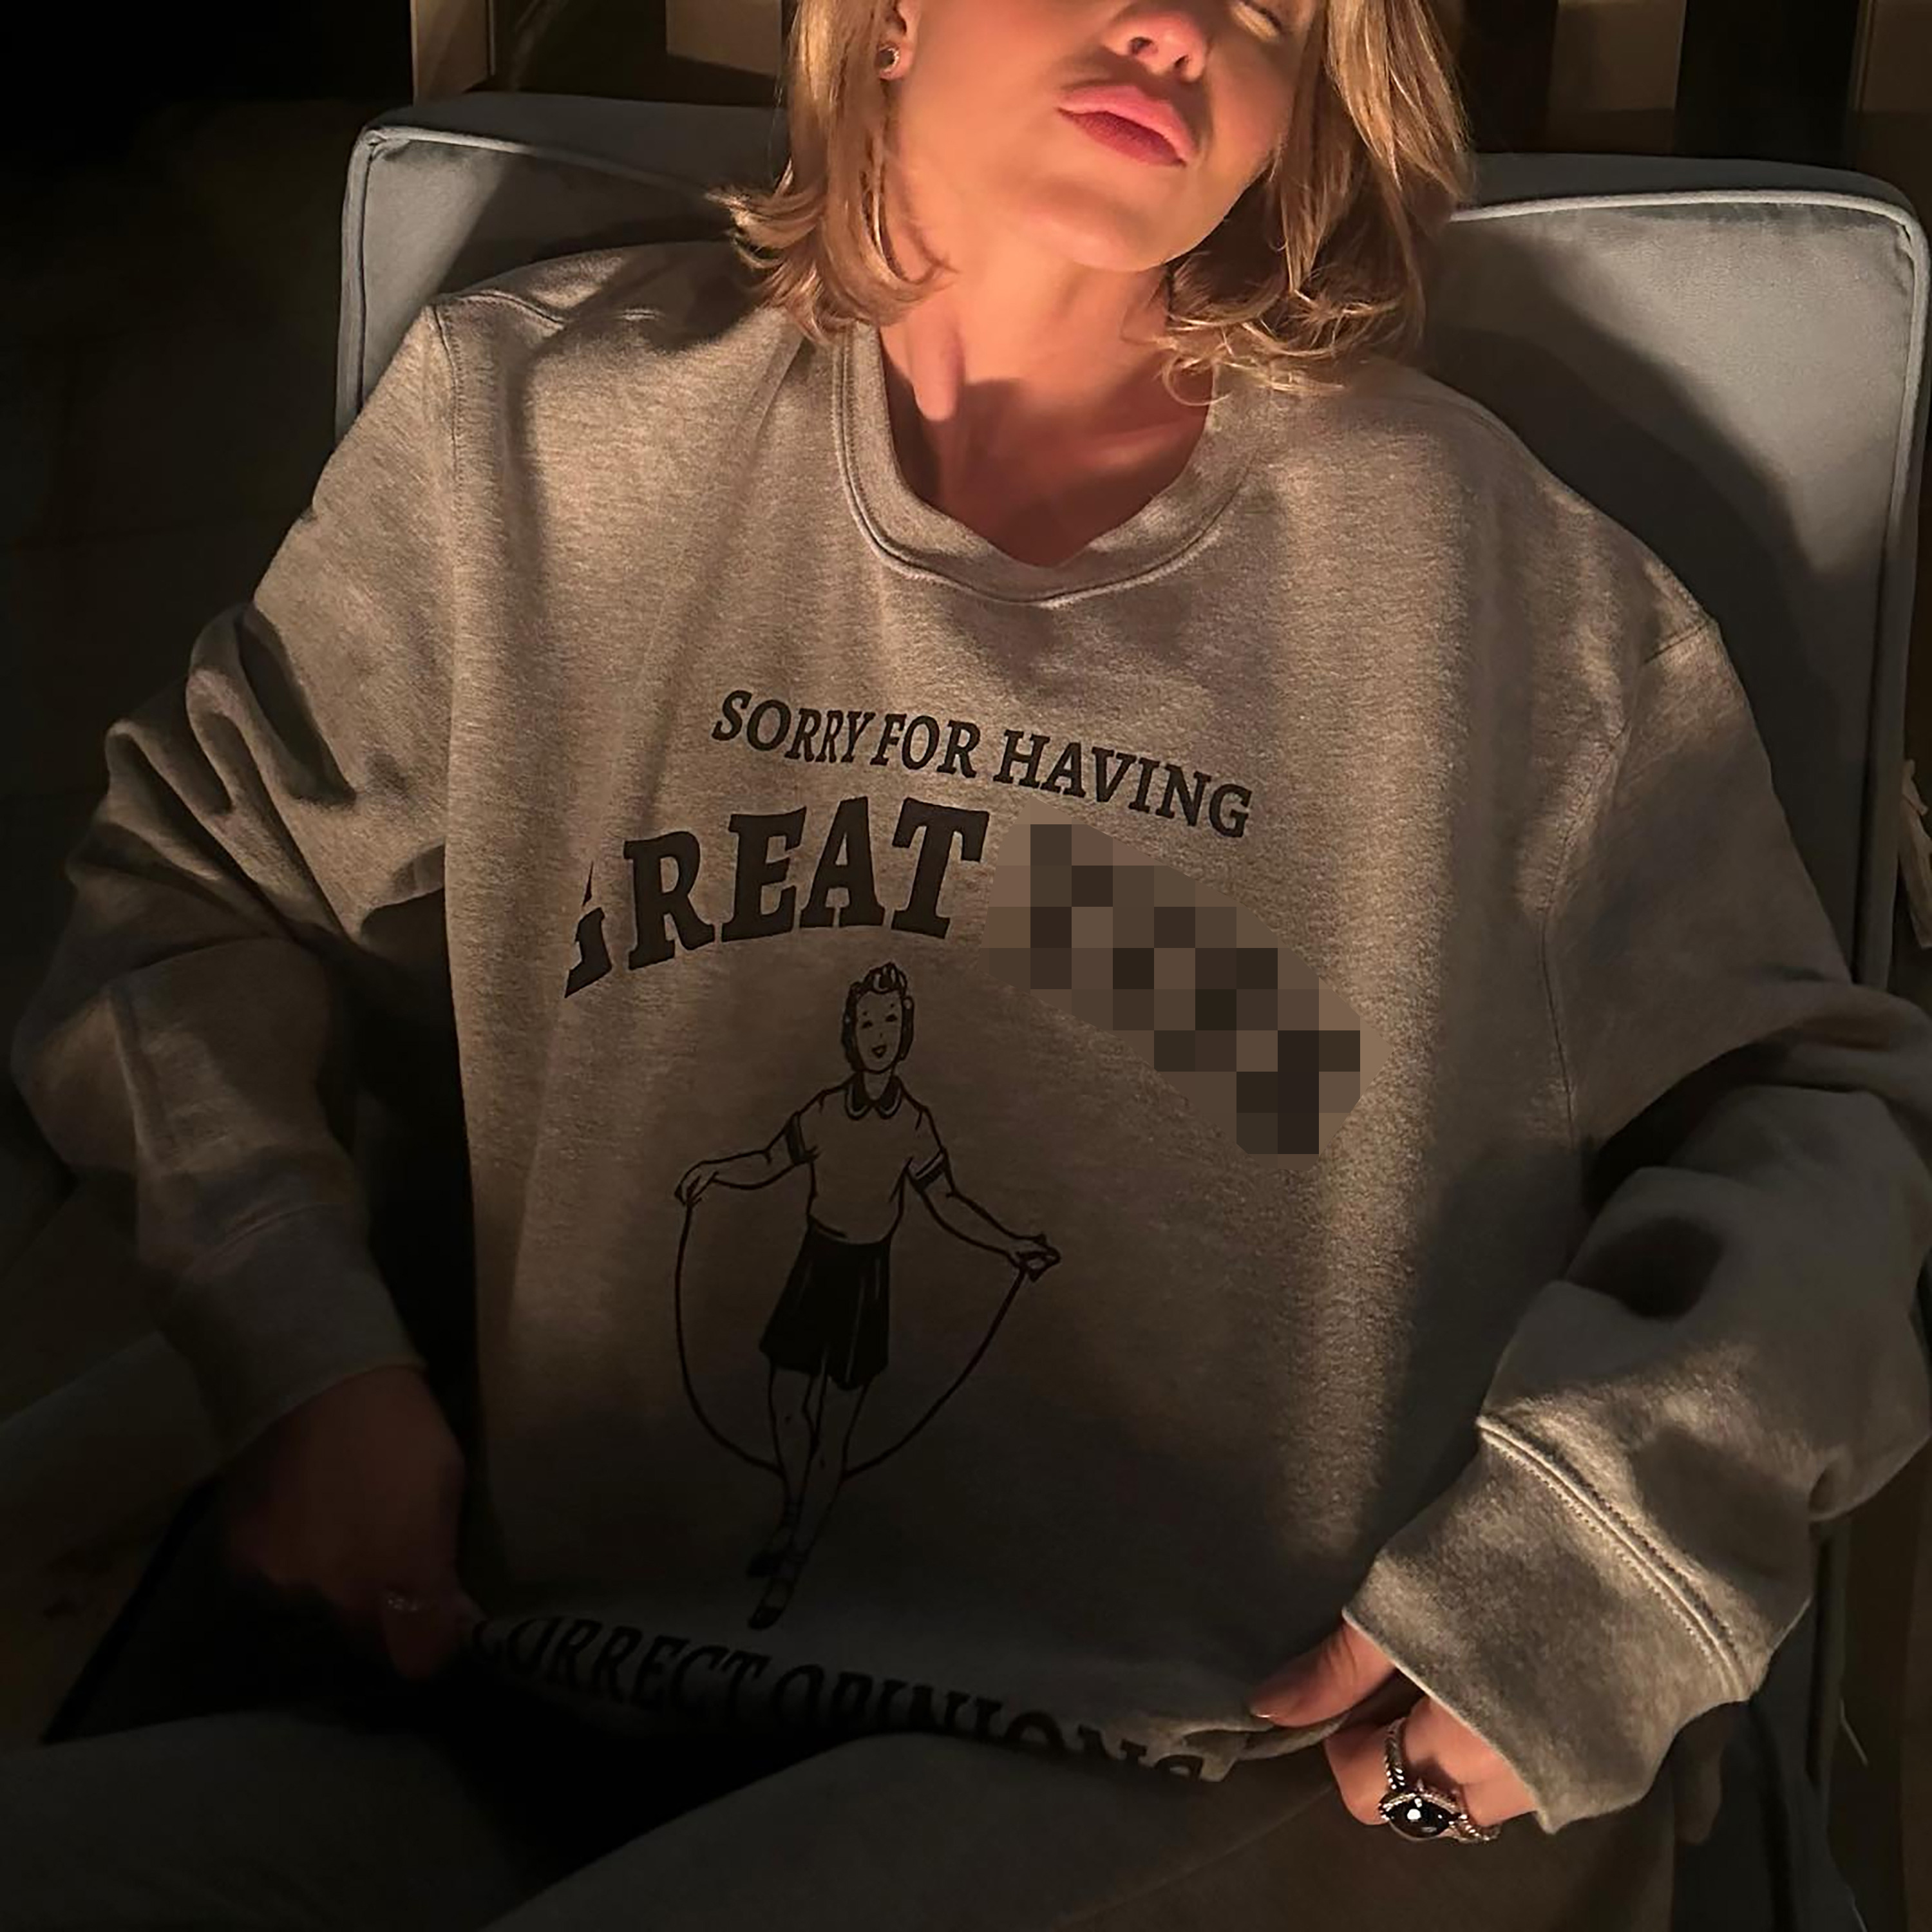 The actress posed in a grey jumper with the slogan: 'Sorry for having great t**s and correct opinions'